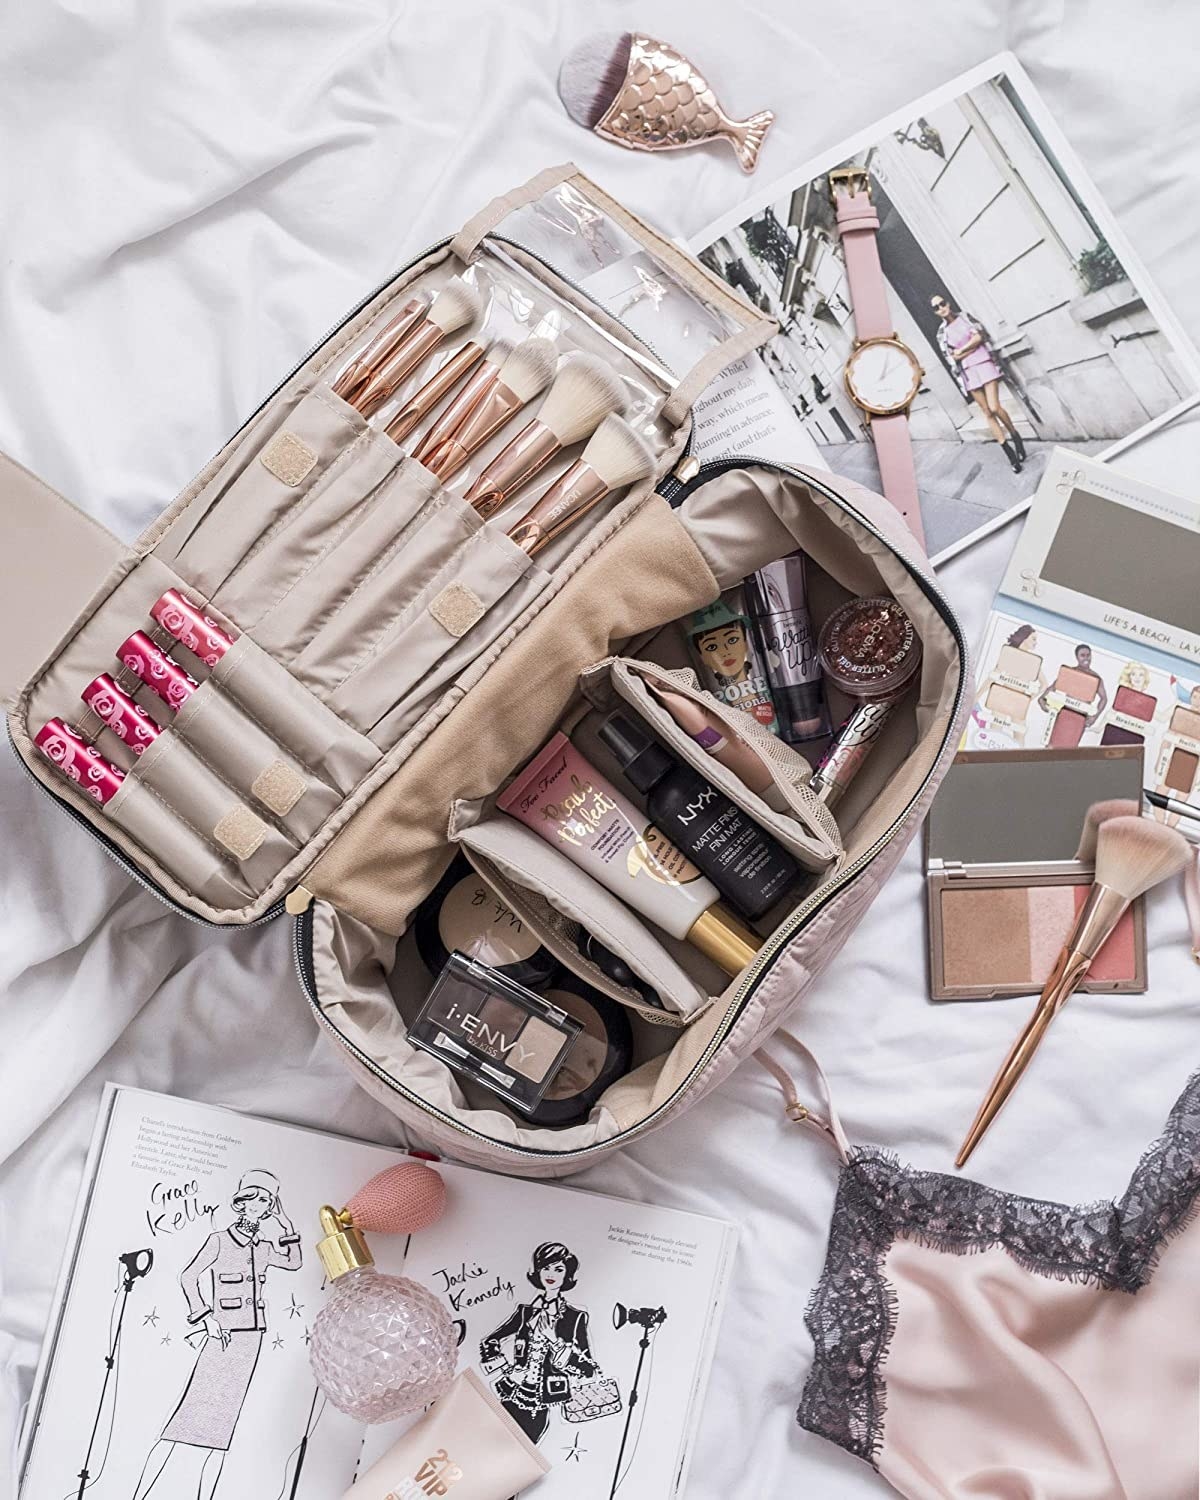 makeup bag filled with makeup surrounded by other products like books, a watch, perfume, and pajamas.